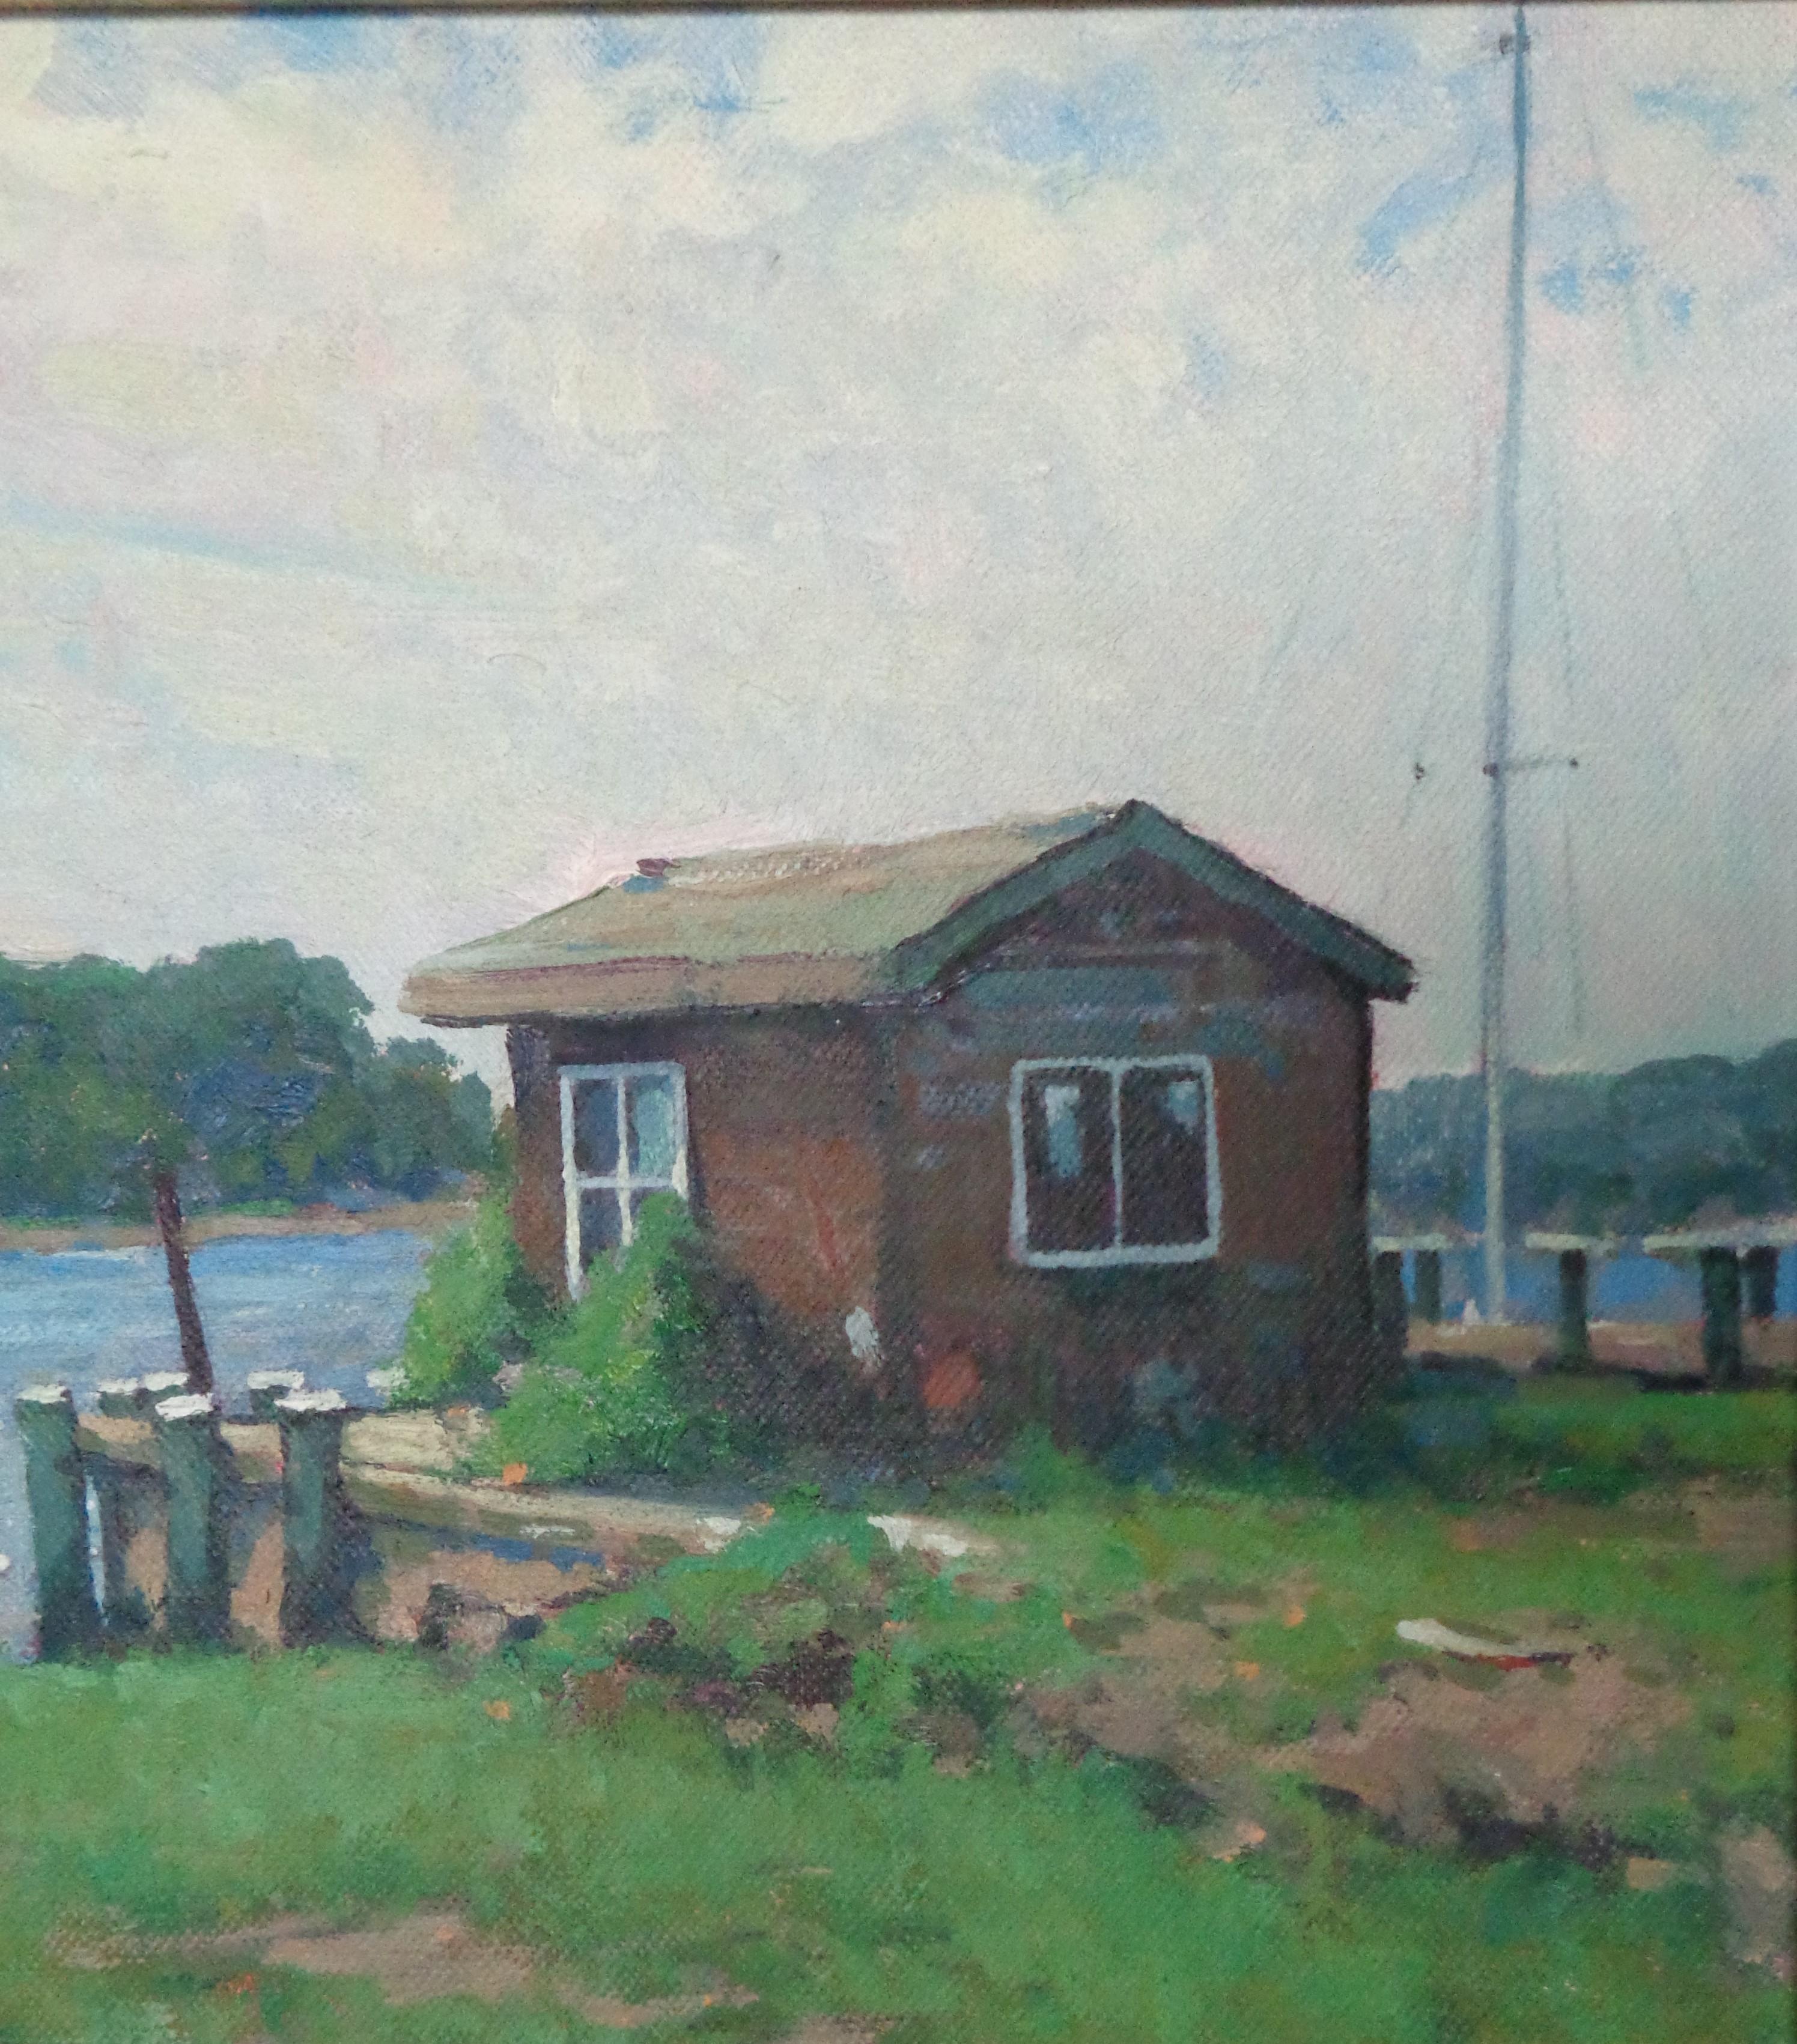 Boat Ocean Impressionistic Marine Painting by Michael Budden Mason;s Island Ct 3